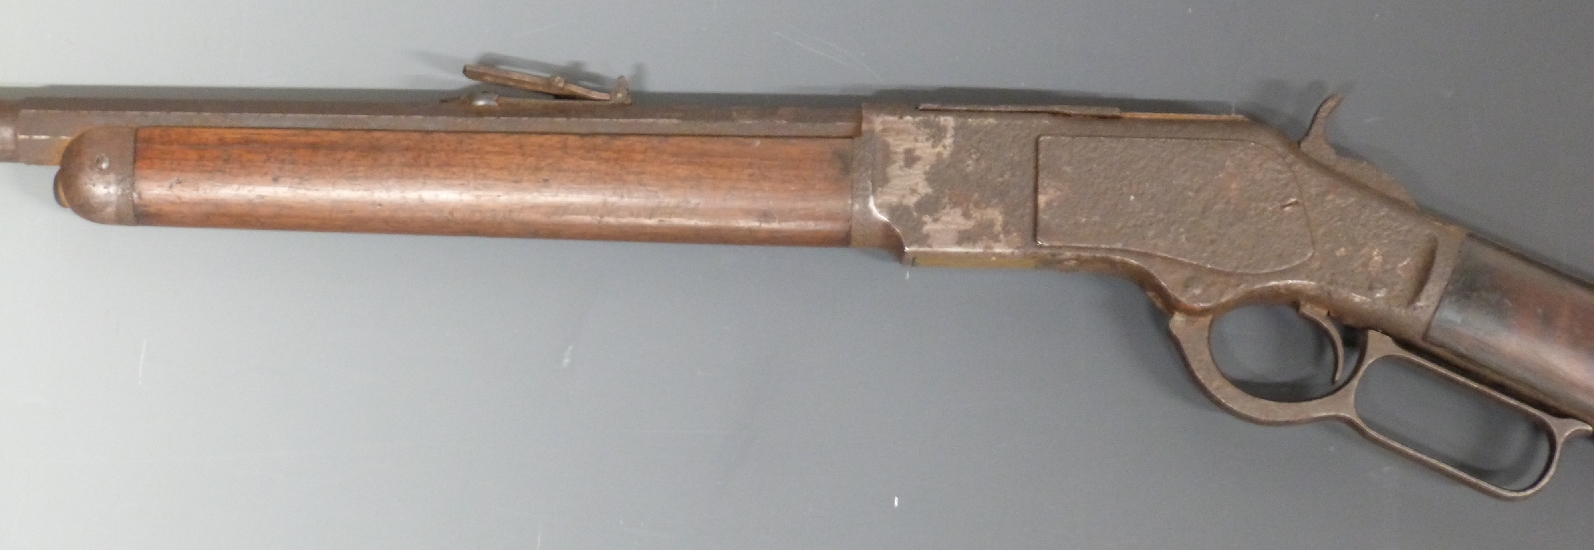 Winchester Model 1873 .44 saddle ring underlever rifle with adjustable pop-up sights, steel butt - Image 7 of 7